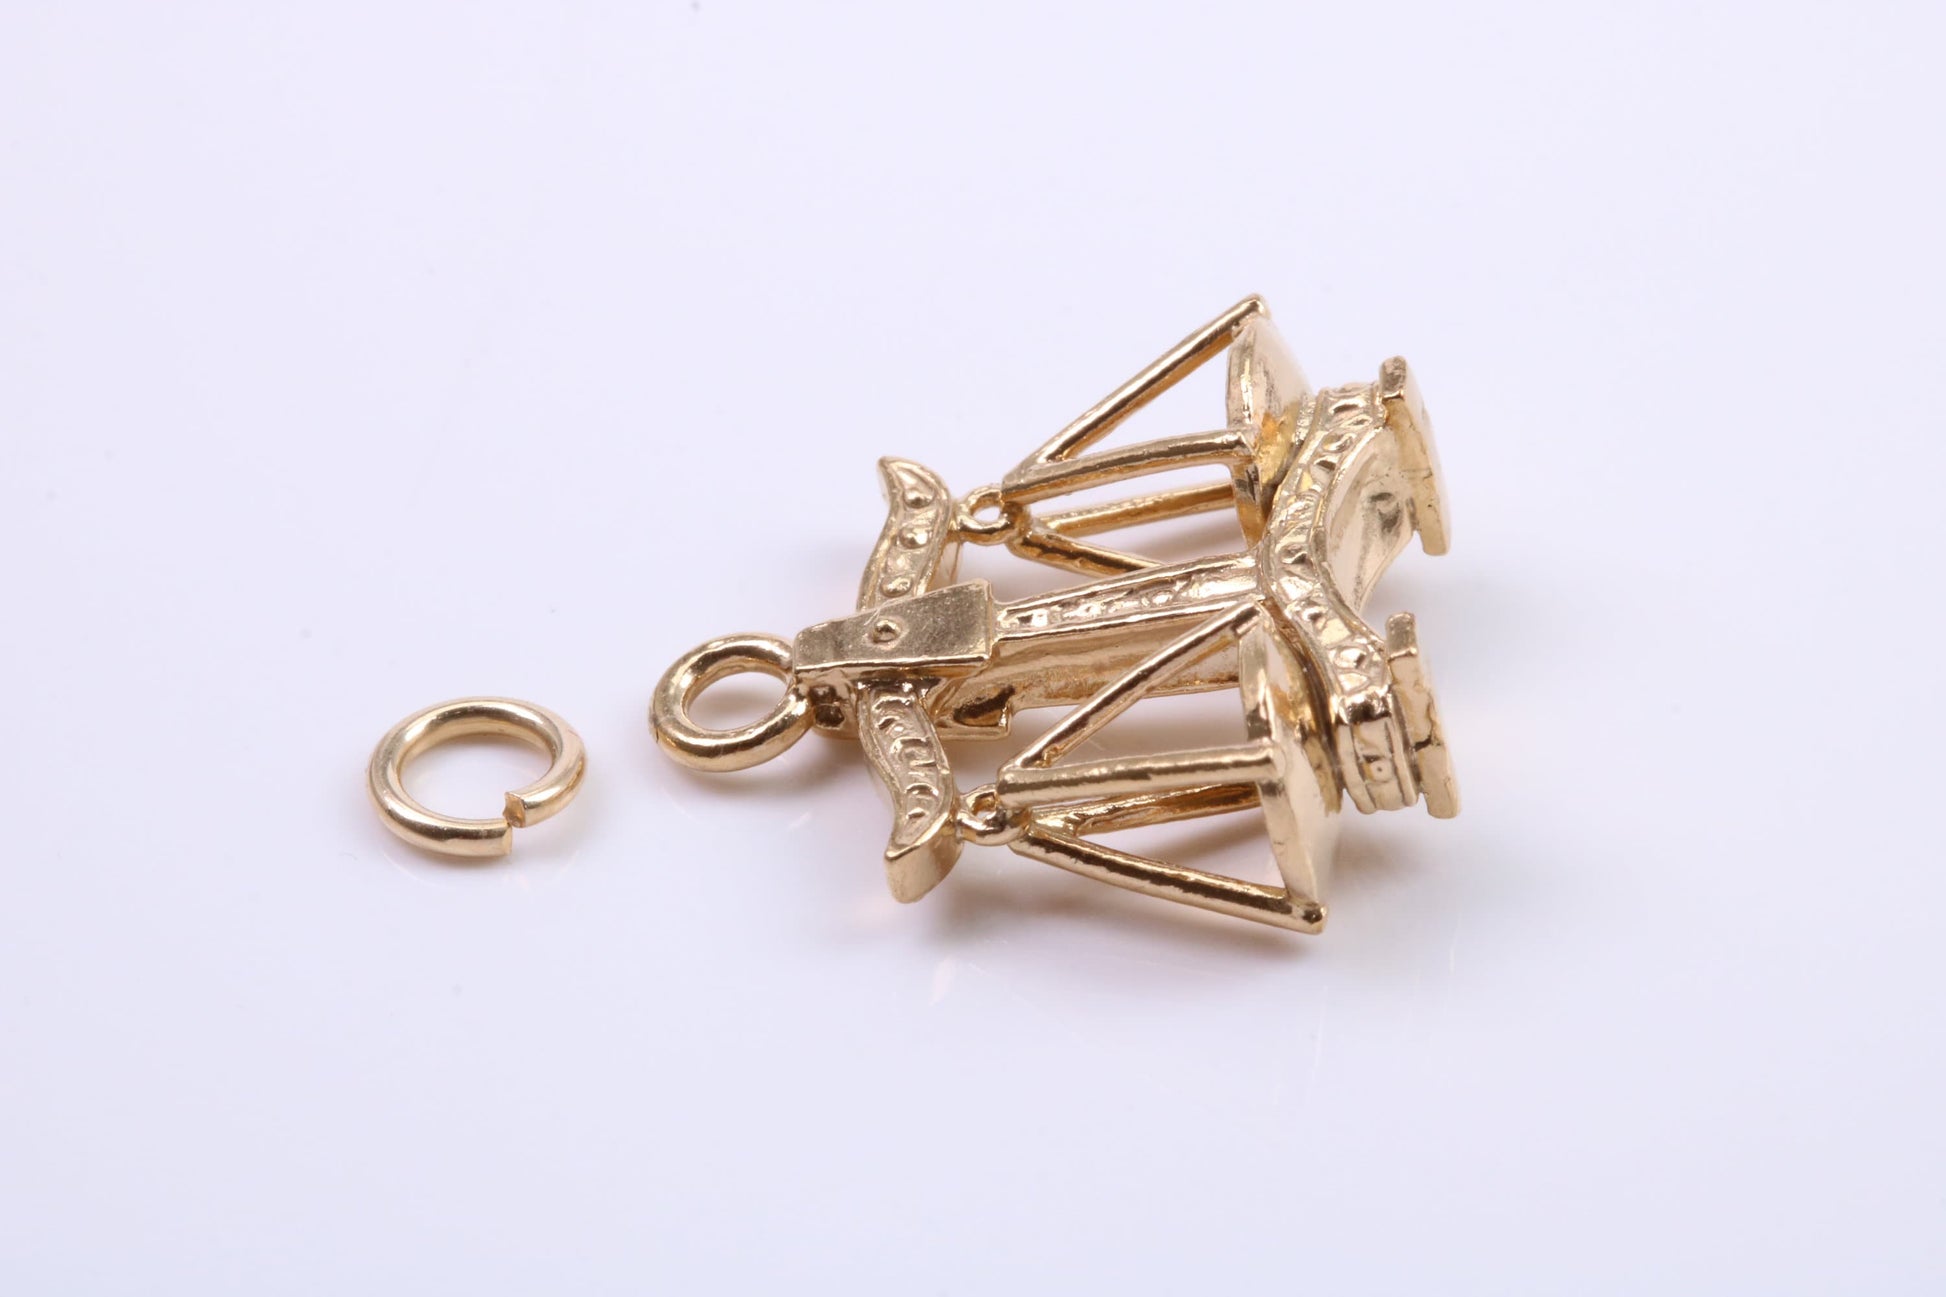 Libra Zodiac Sign Charm, Traditional Charm, Made from Solid 9ct Yellow Gold, British Hallmarked, Complete with Attachment Link